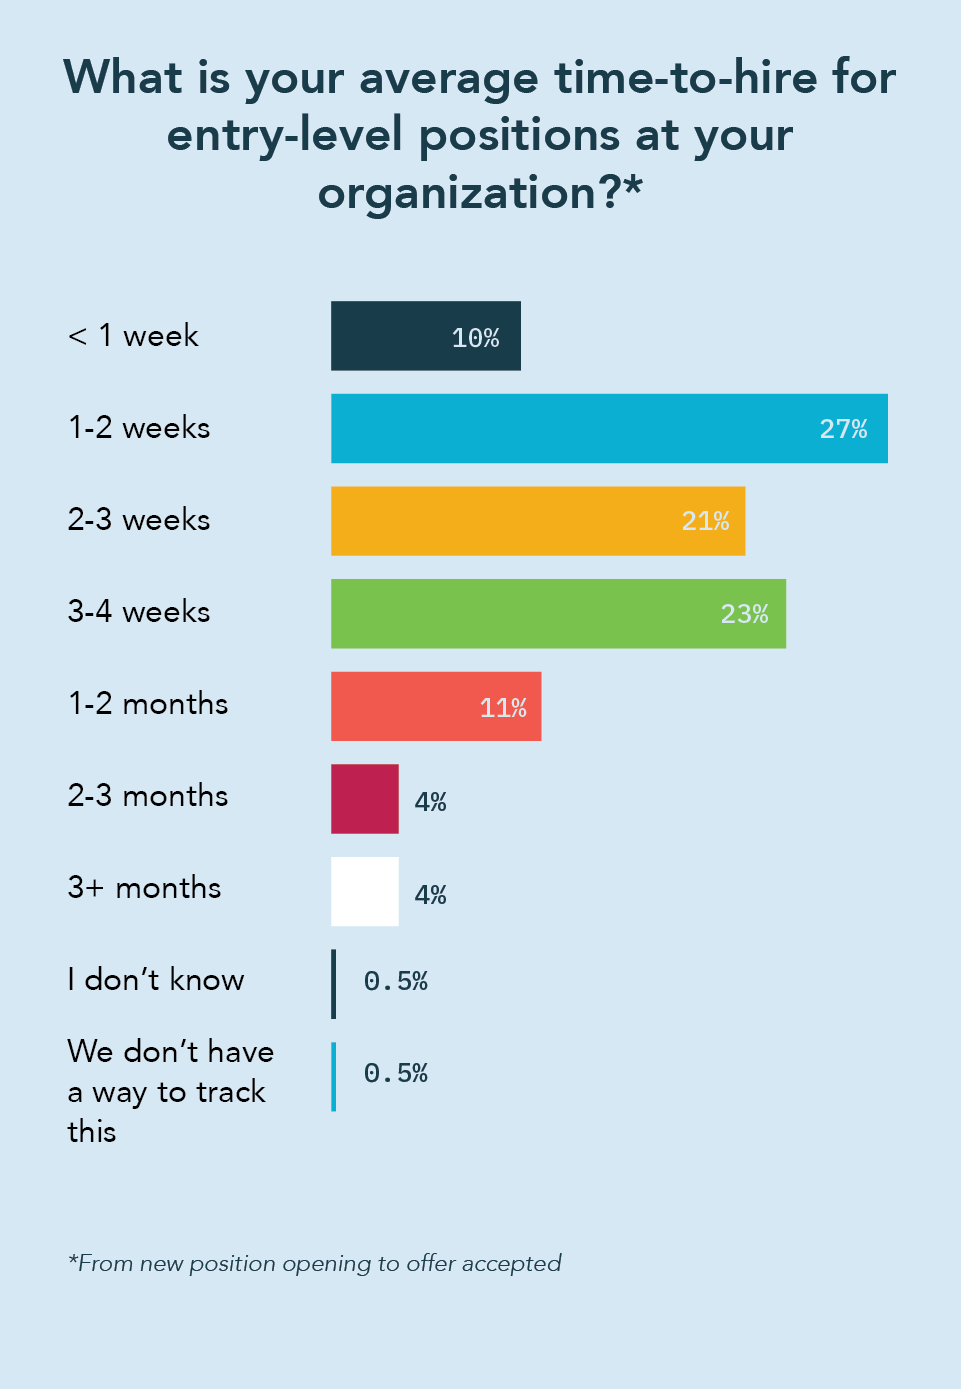 When asked what is their average time-to-hire for entry-level positions in their organization, 27% said 1-2 weeks, 23% said 2-4 weeks, 21% said 2-3 weeks, 11% said 1-2 months, and only 10% said under 1 week.